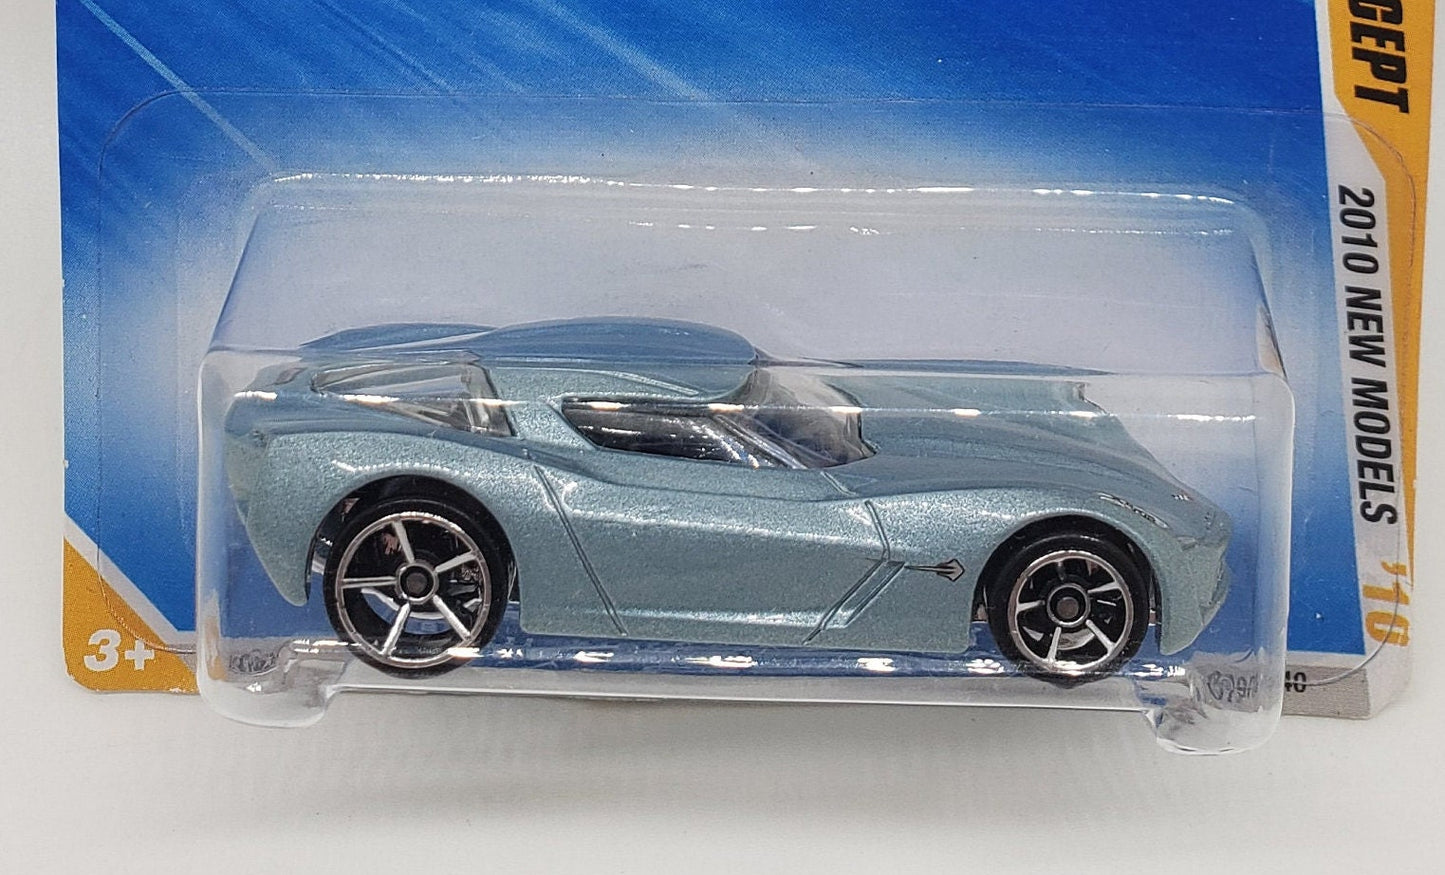 Hot Wheels Corvette Stingray Concept Metalflake Grey New Models Perfect Birthday Gift Miniature Collectable Model Toy Car